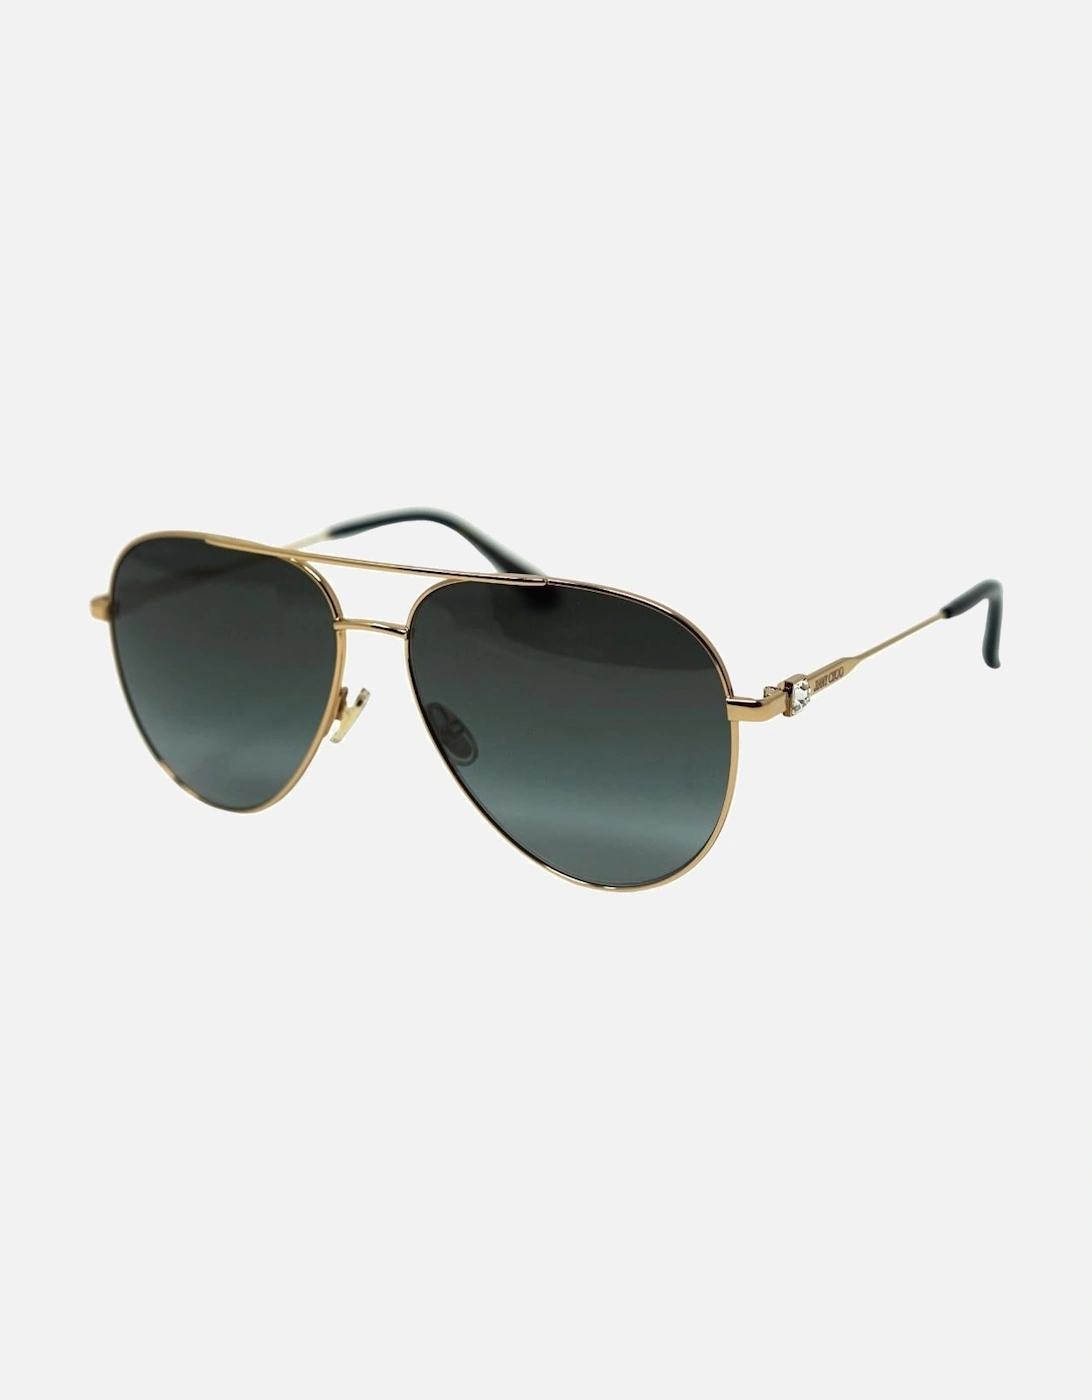 Olly/S 02M0 90 Gold Sunglasses